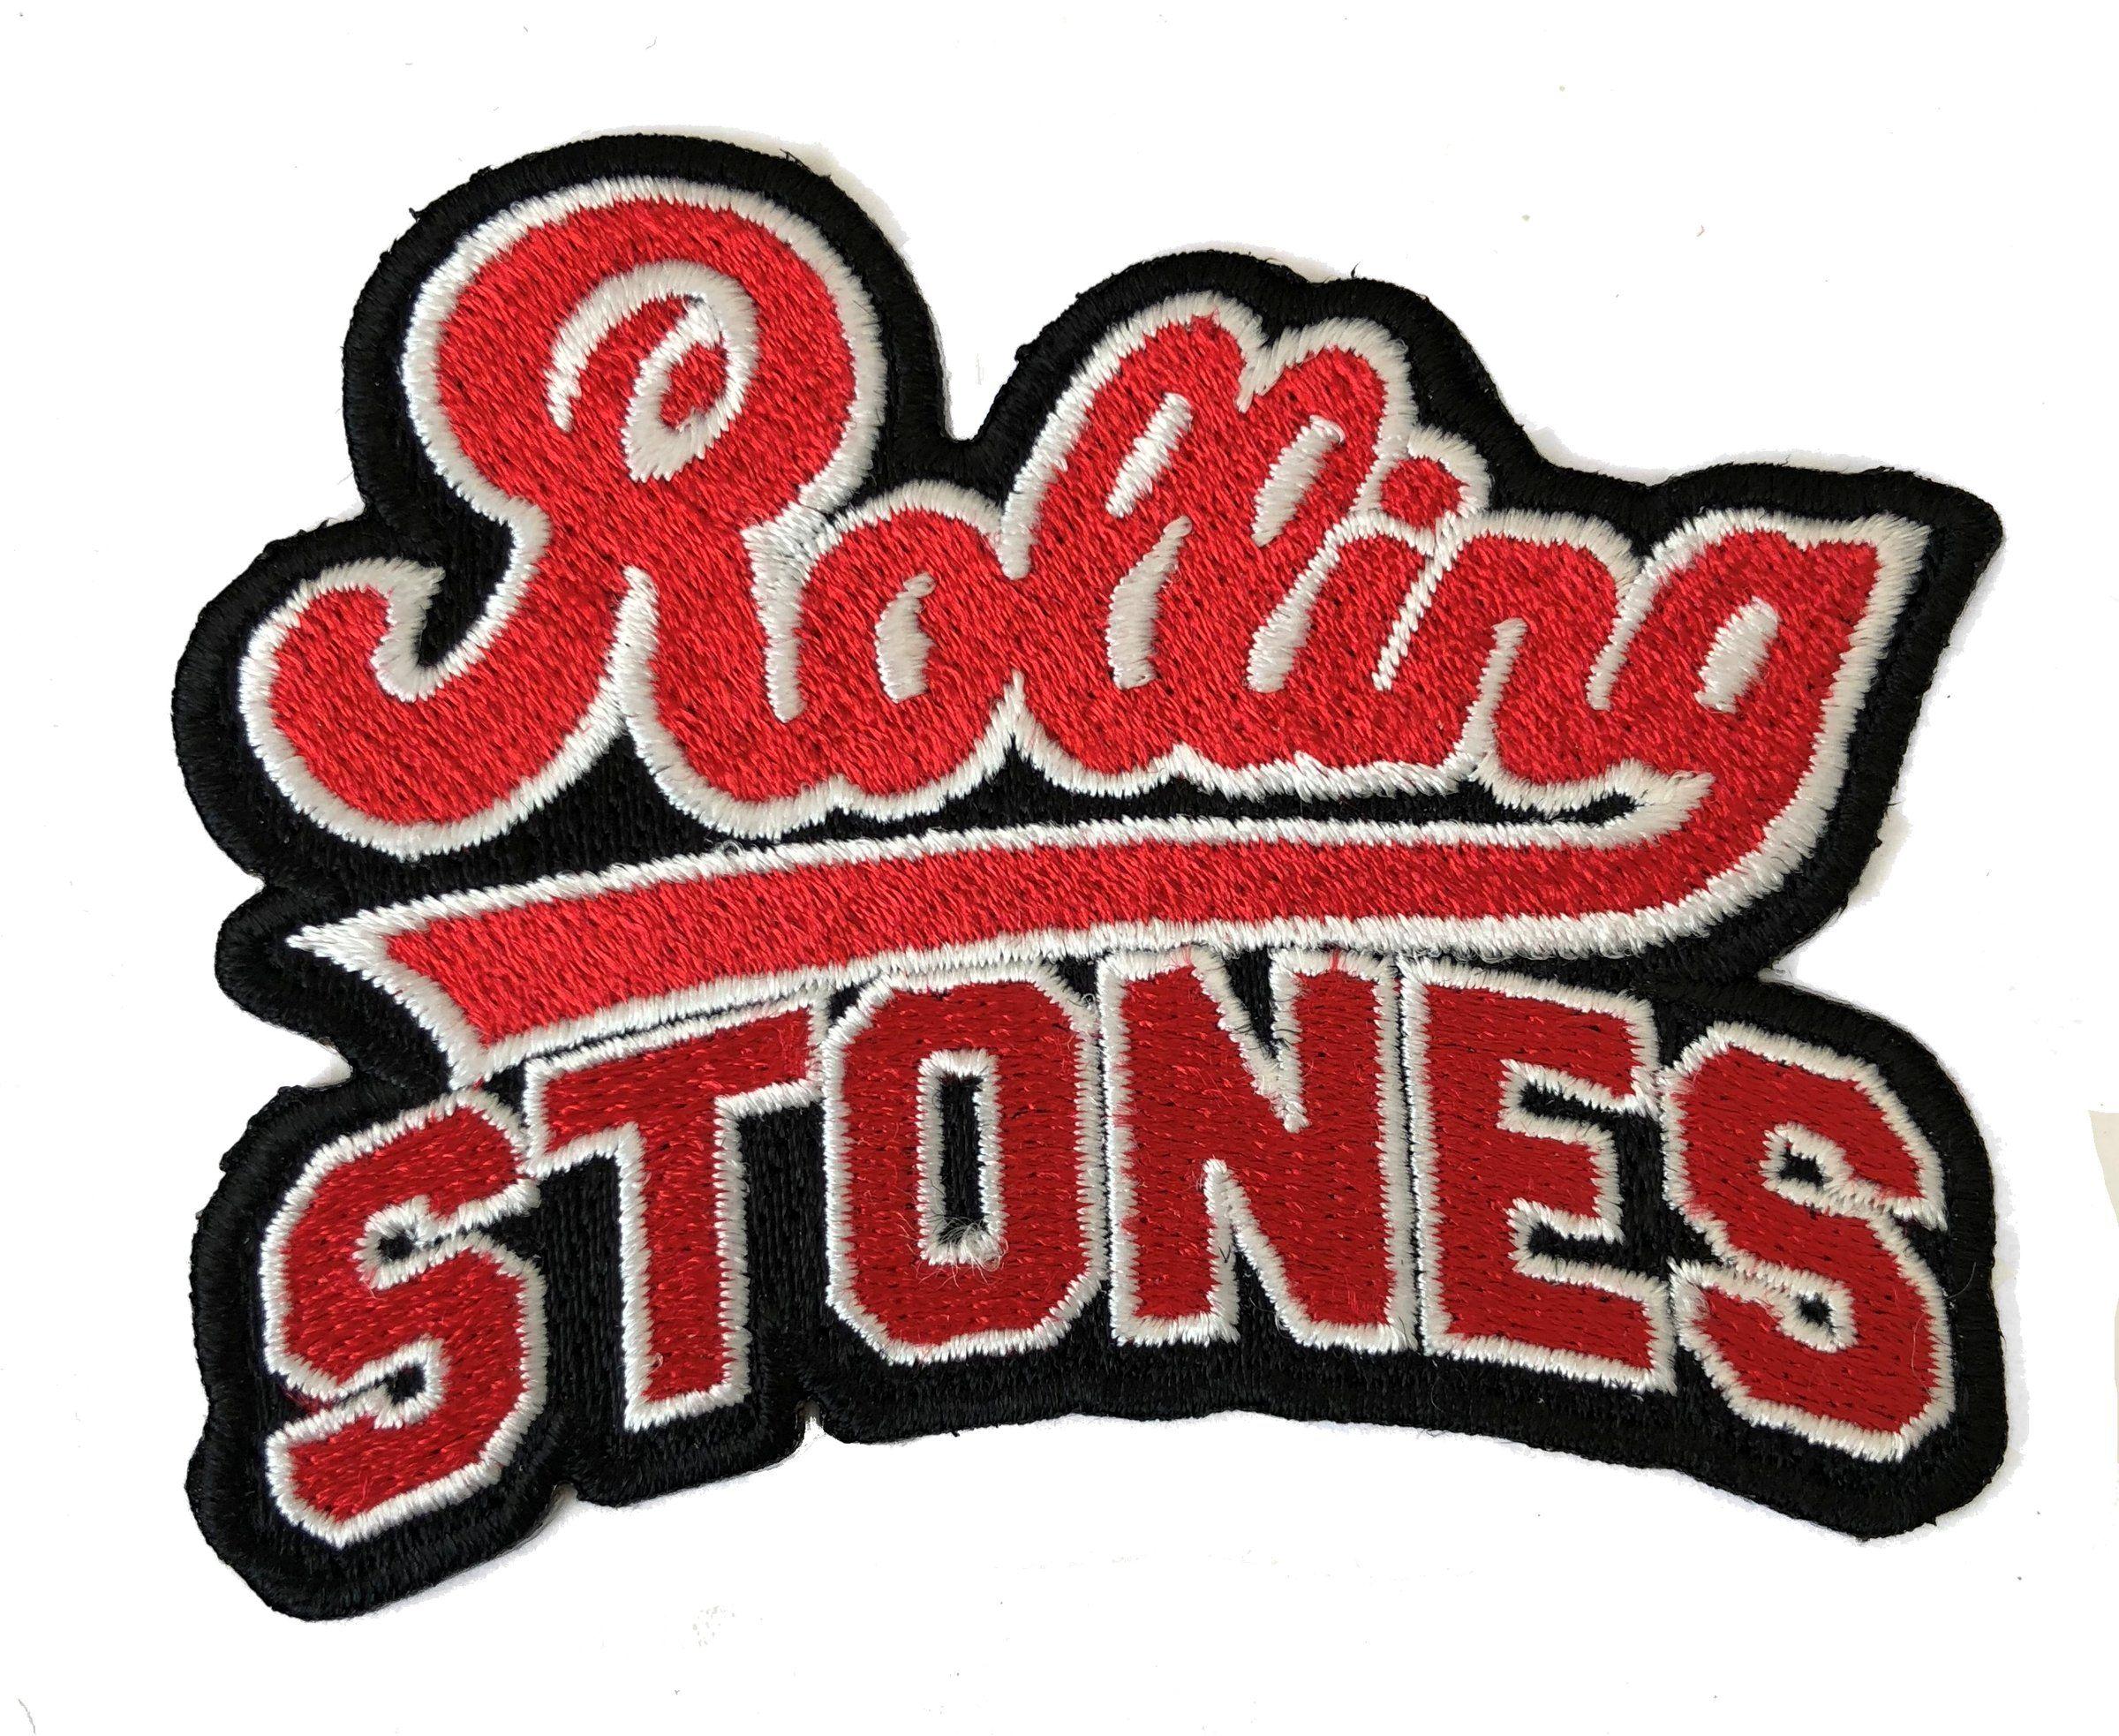 Rolling Stones Official Logo - Rolling Stones Team Logo Patch Official Iron On Woven Patch Brand